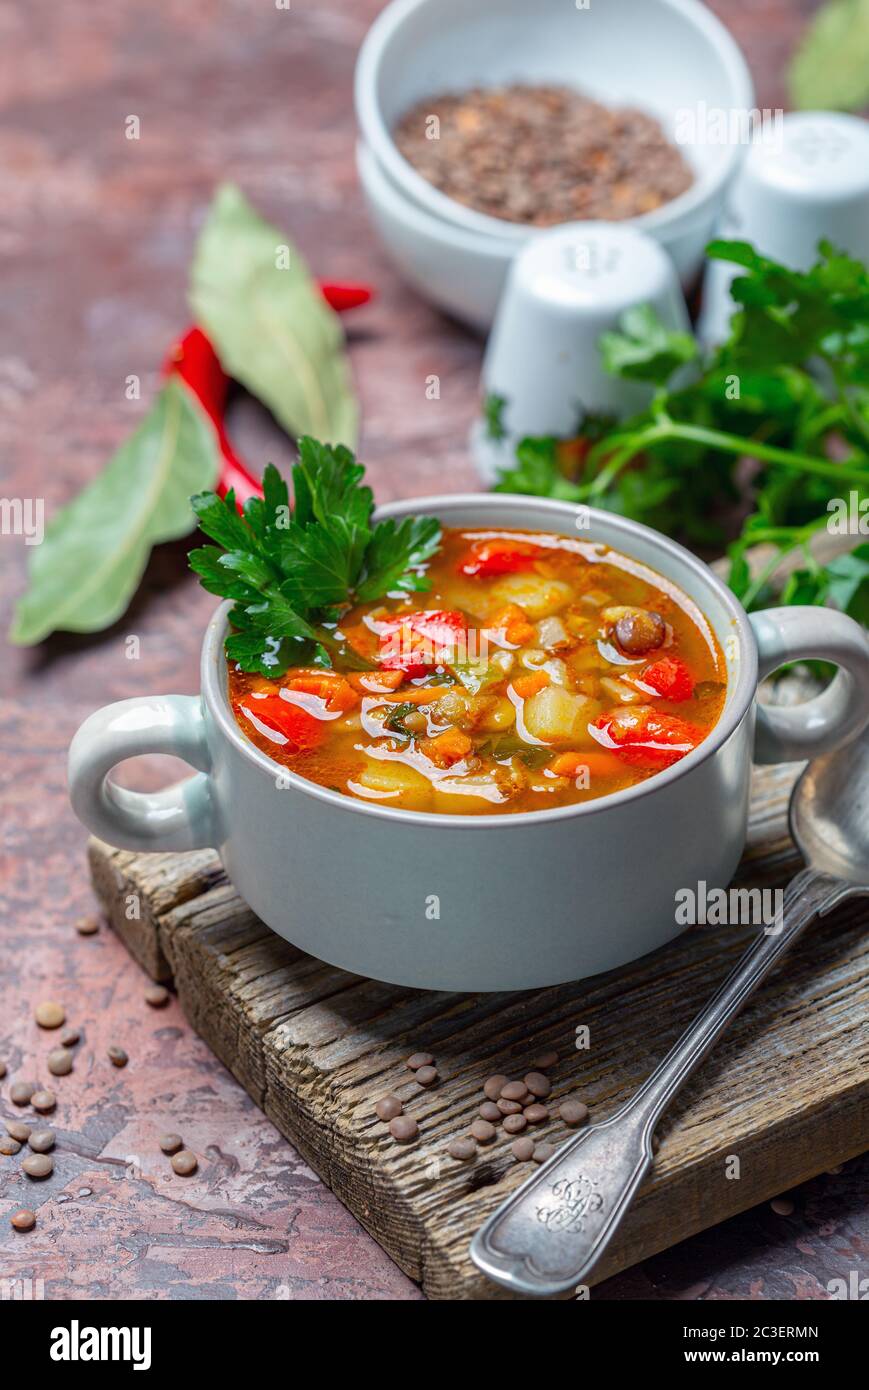 Lentil and pea soup with vegetables. Stock Photo